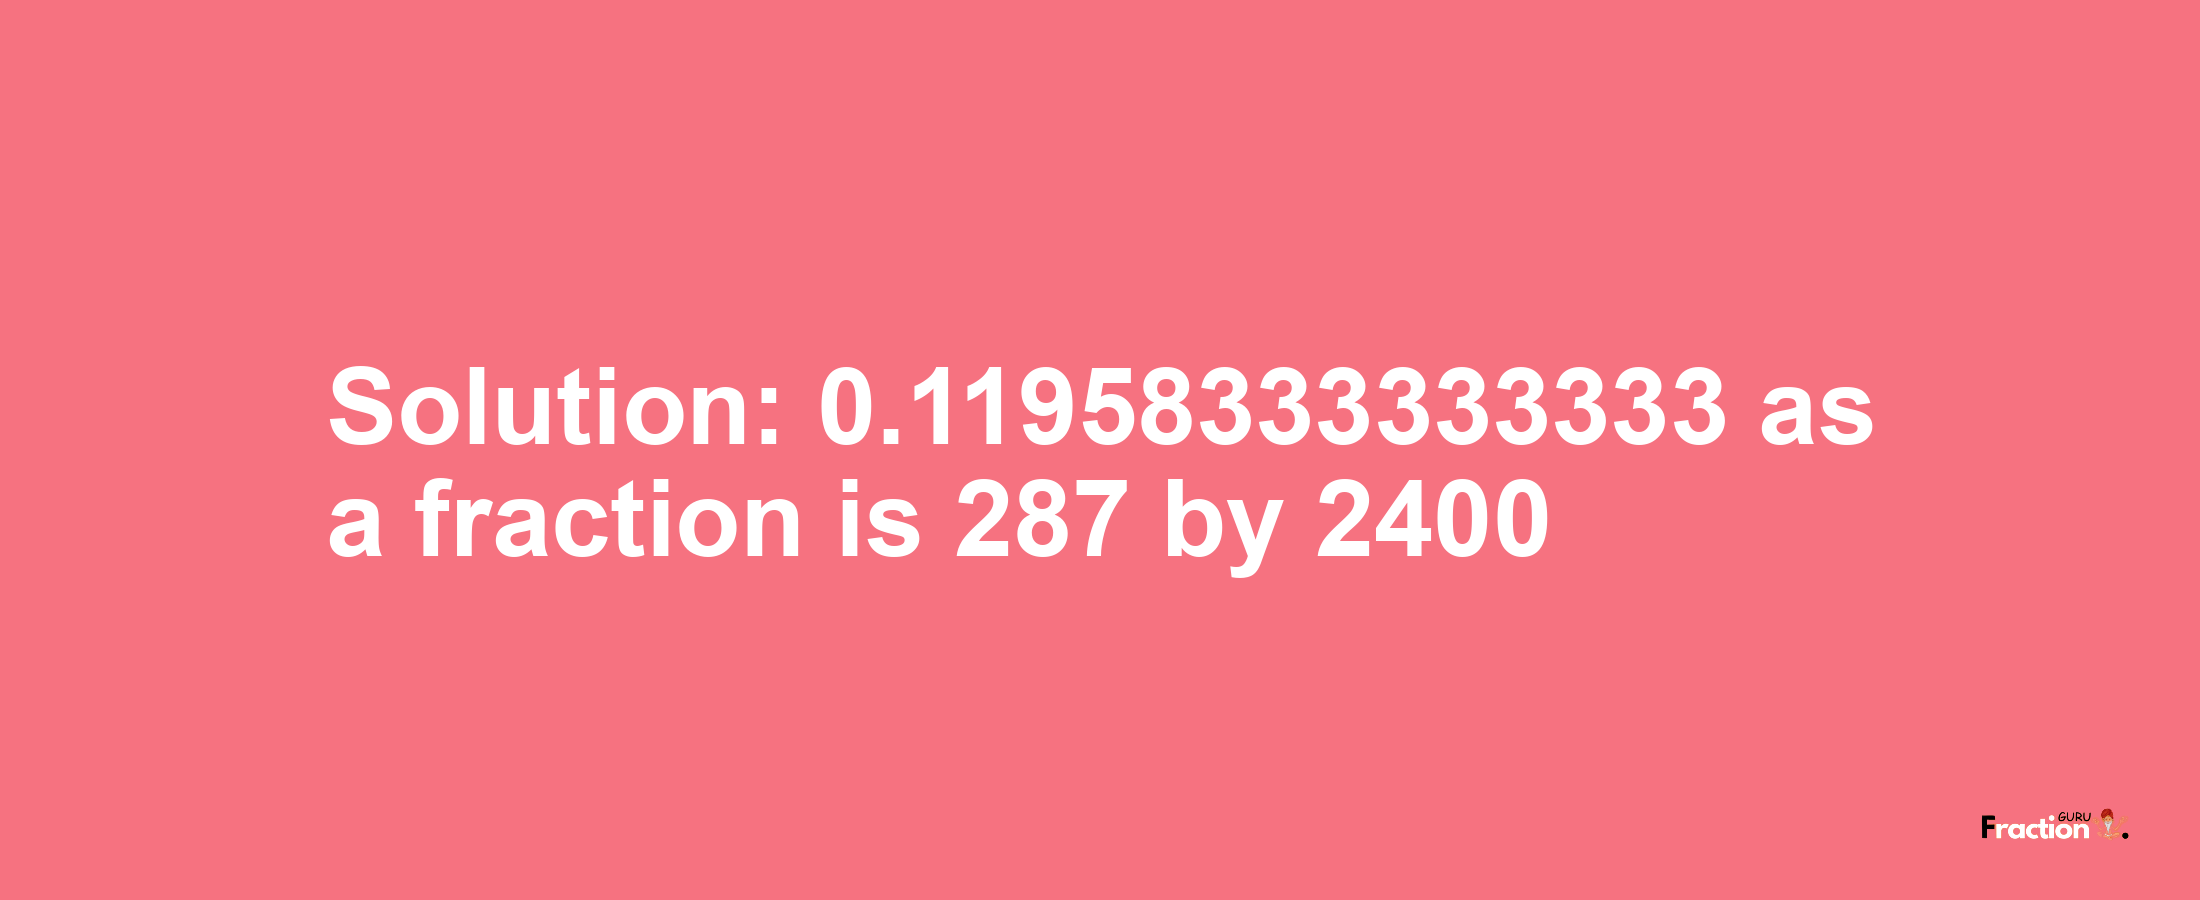 Solution:0.11958333333333 as a fraction is 287/2400